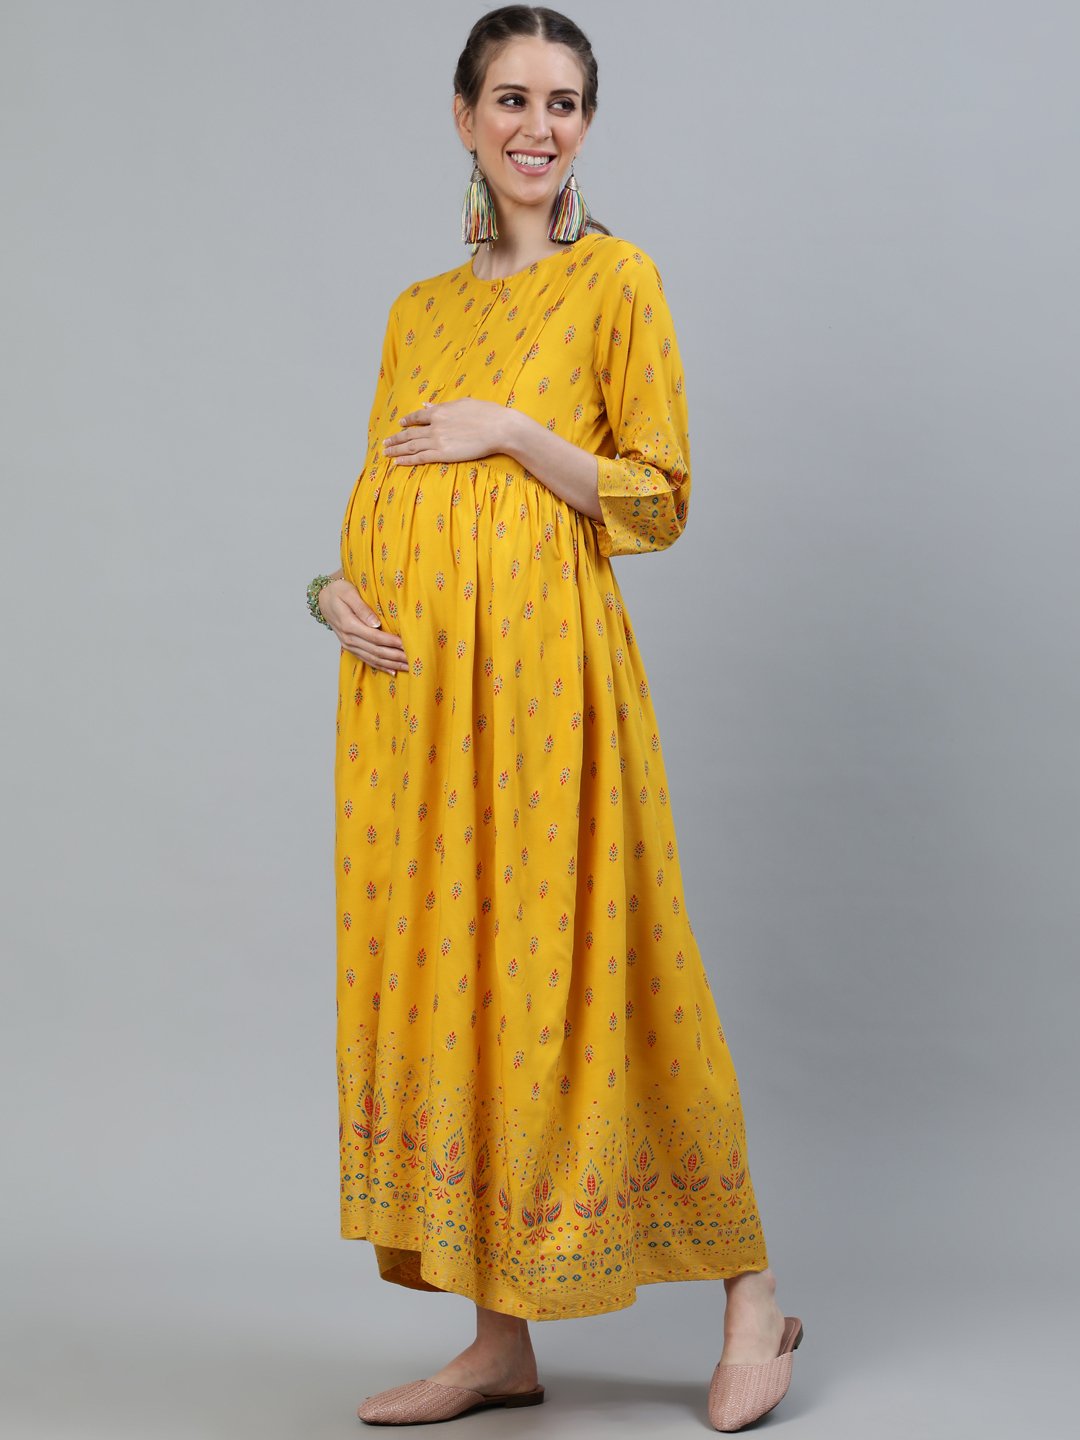 Women's Yellow & Gold Printed Maternity Dress With Three Quarter Sleeves - Nayo Clothing